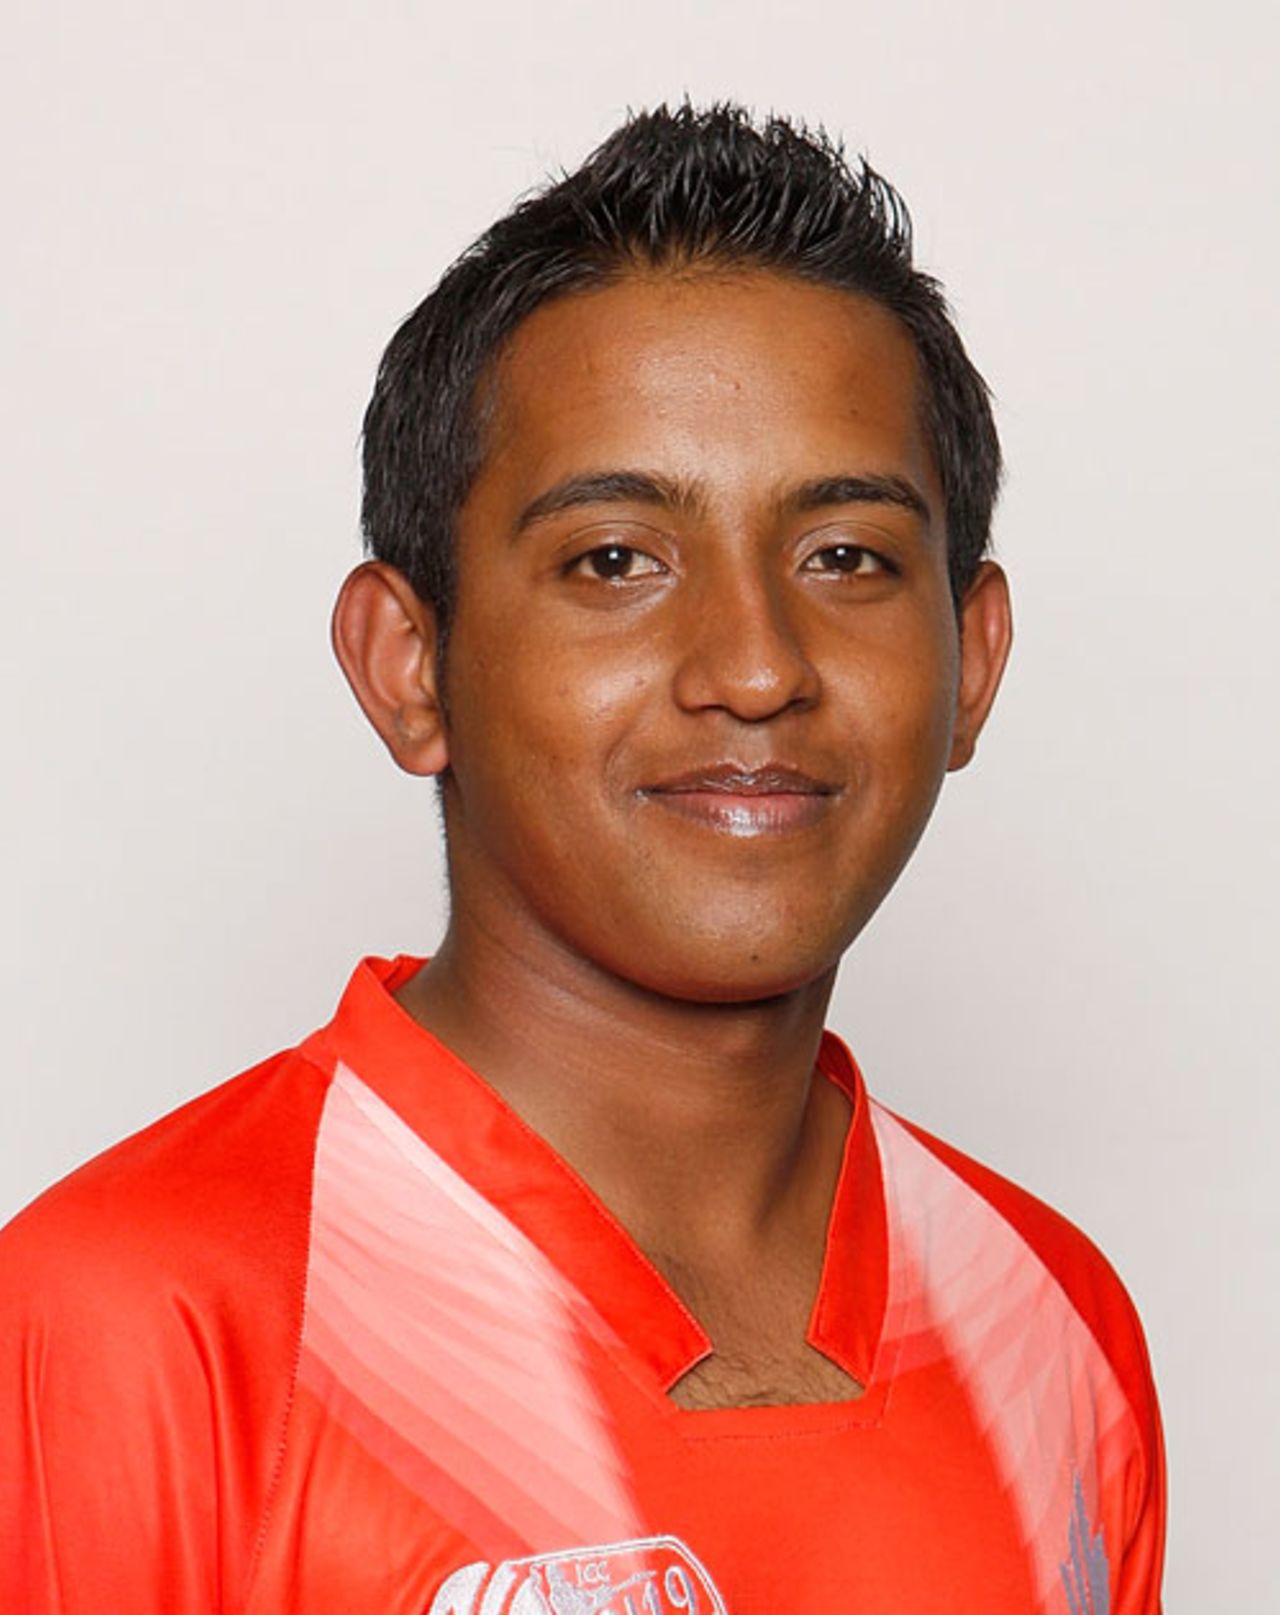 Parth Desai at the Under-19 World Cup, 13 January, 2010